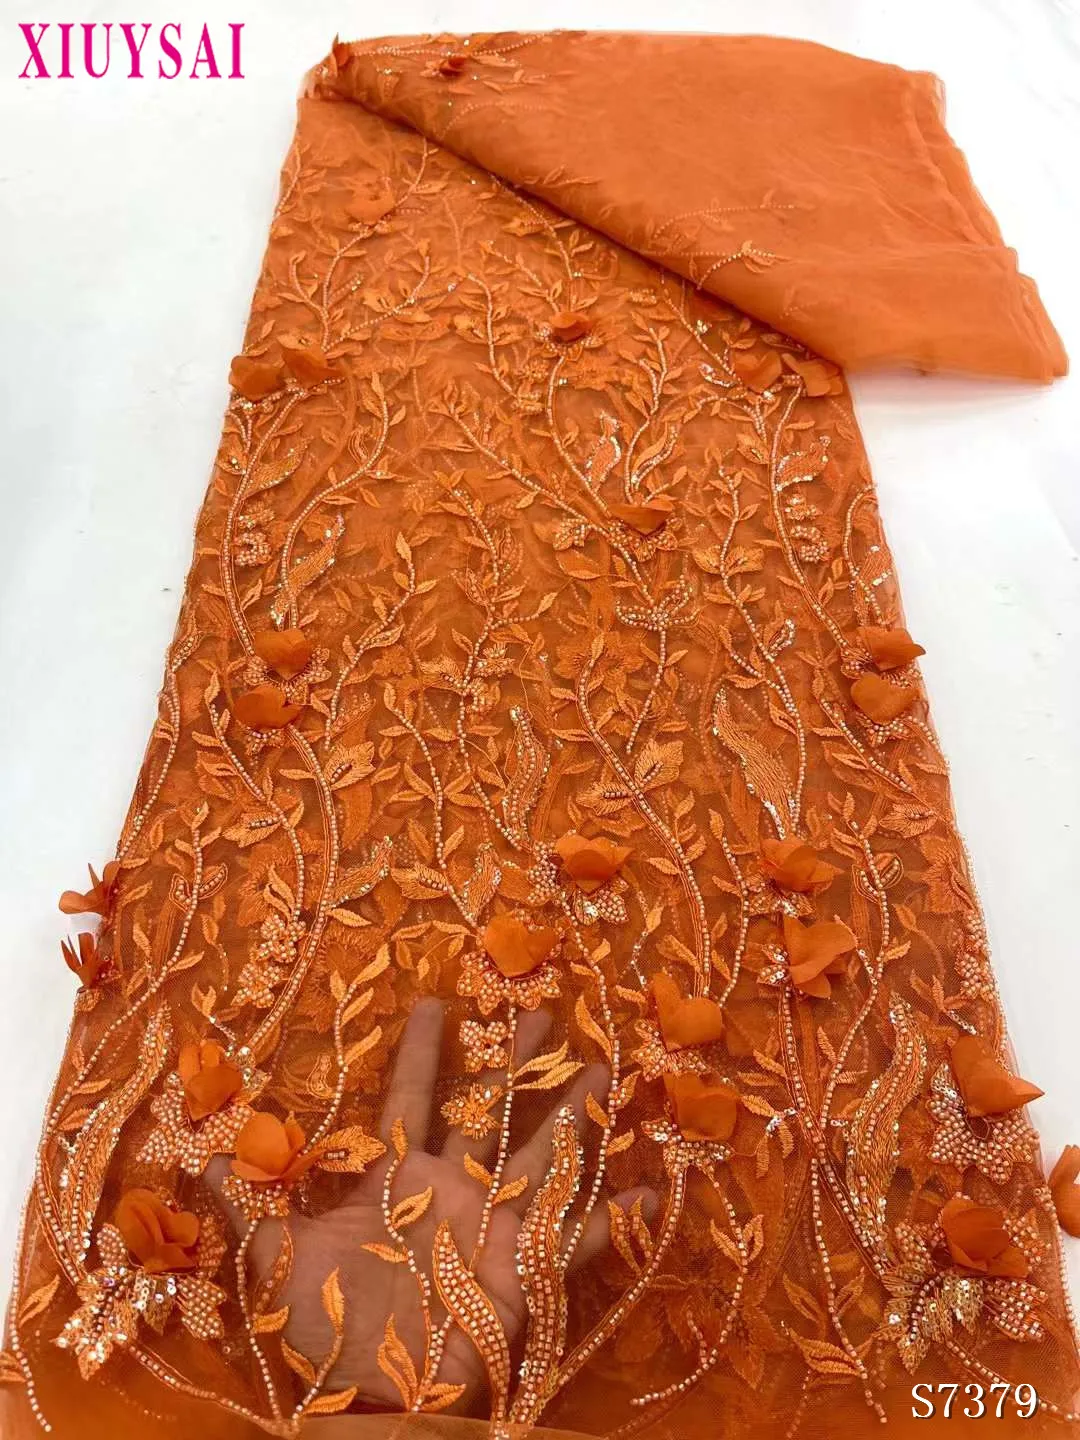 

Luxury African Mesh Fabrics Embroidery Sequins For Women Sewing Evening Dresses Orange Dubai Beading Lace Fabric 5 Yards Meters